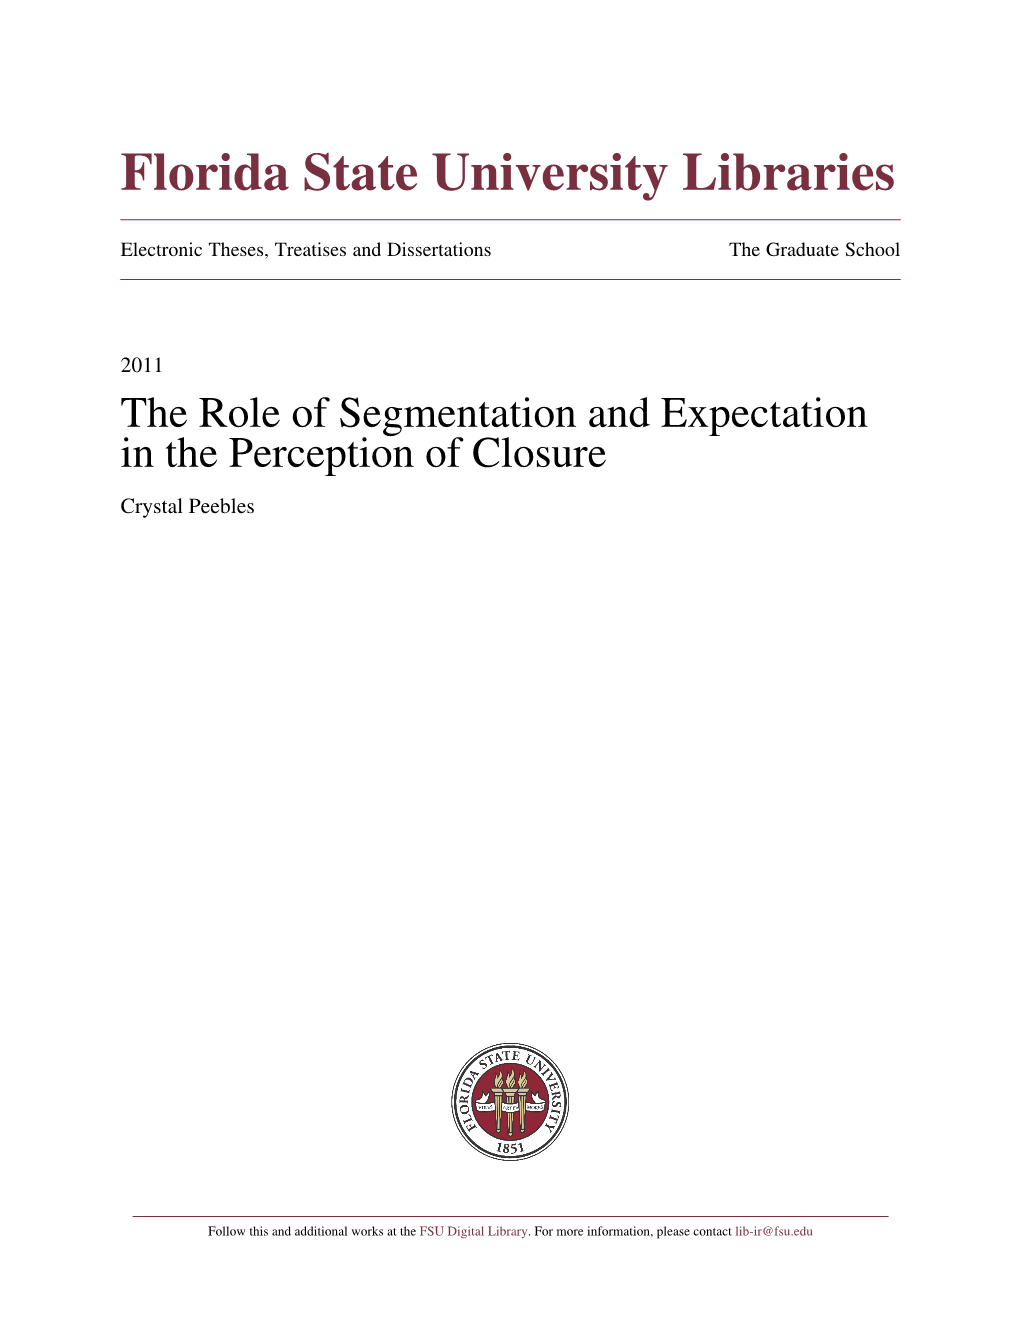 The Role of Segmentation and Expectation in the Perception of Closure Crystal Peebles